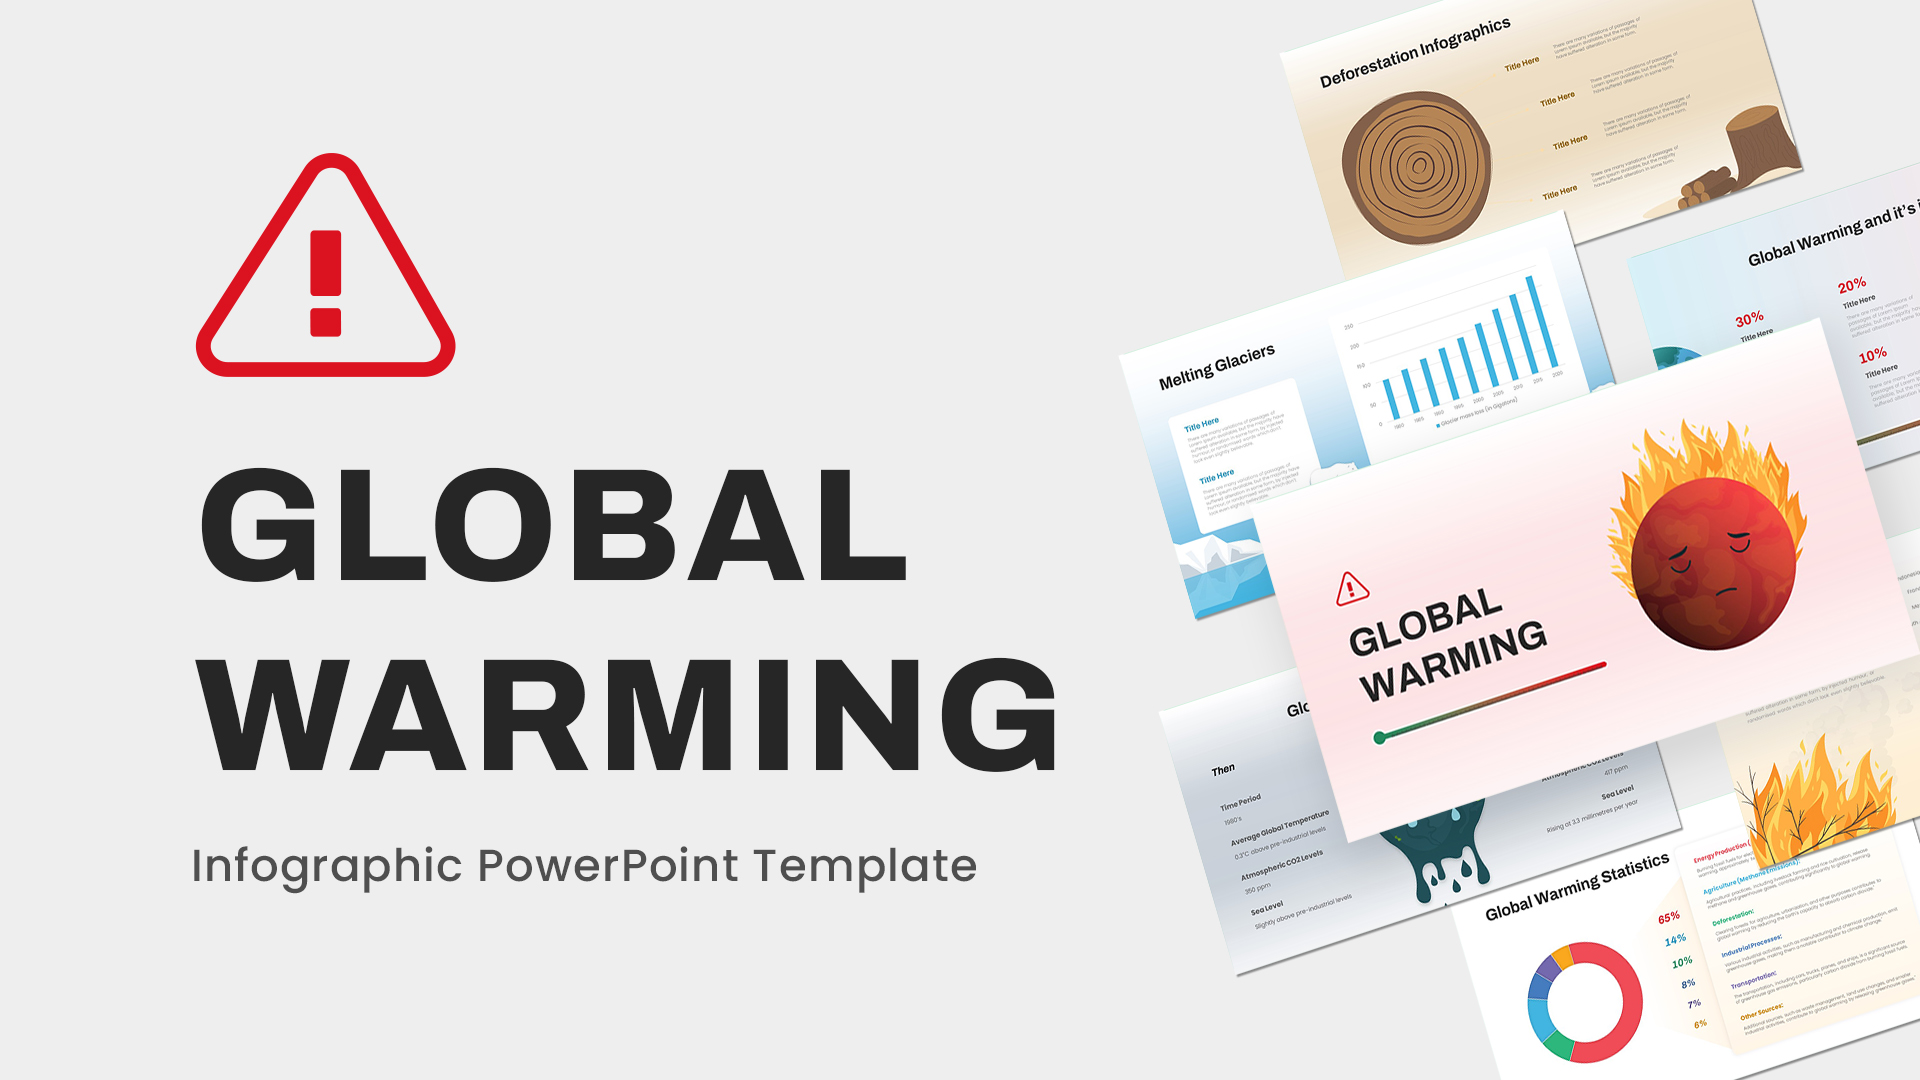 Global Warming Infographic PowerPoint Template Deck